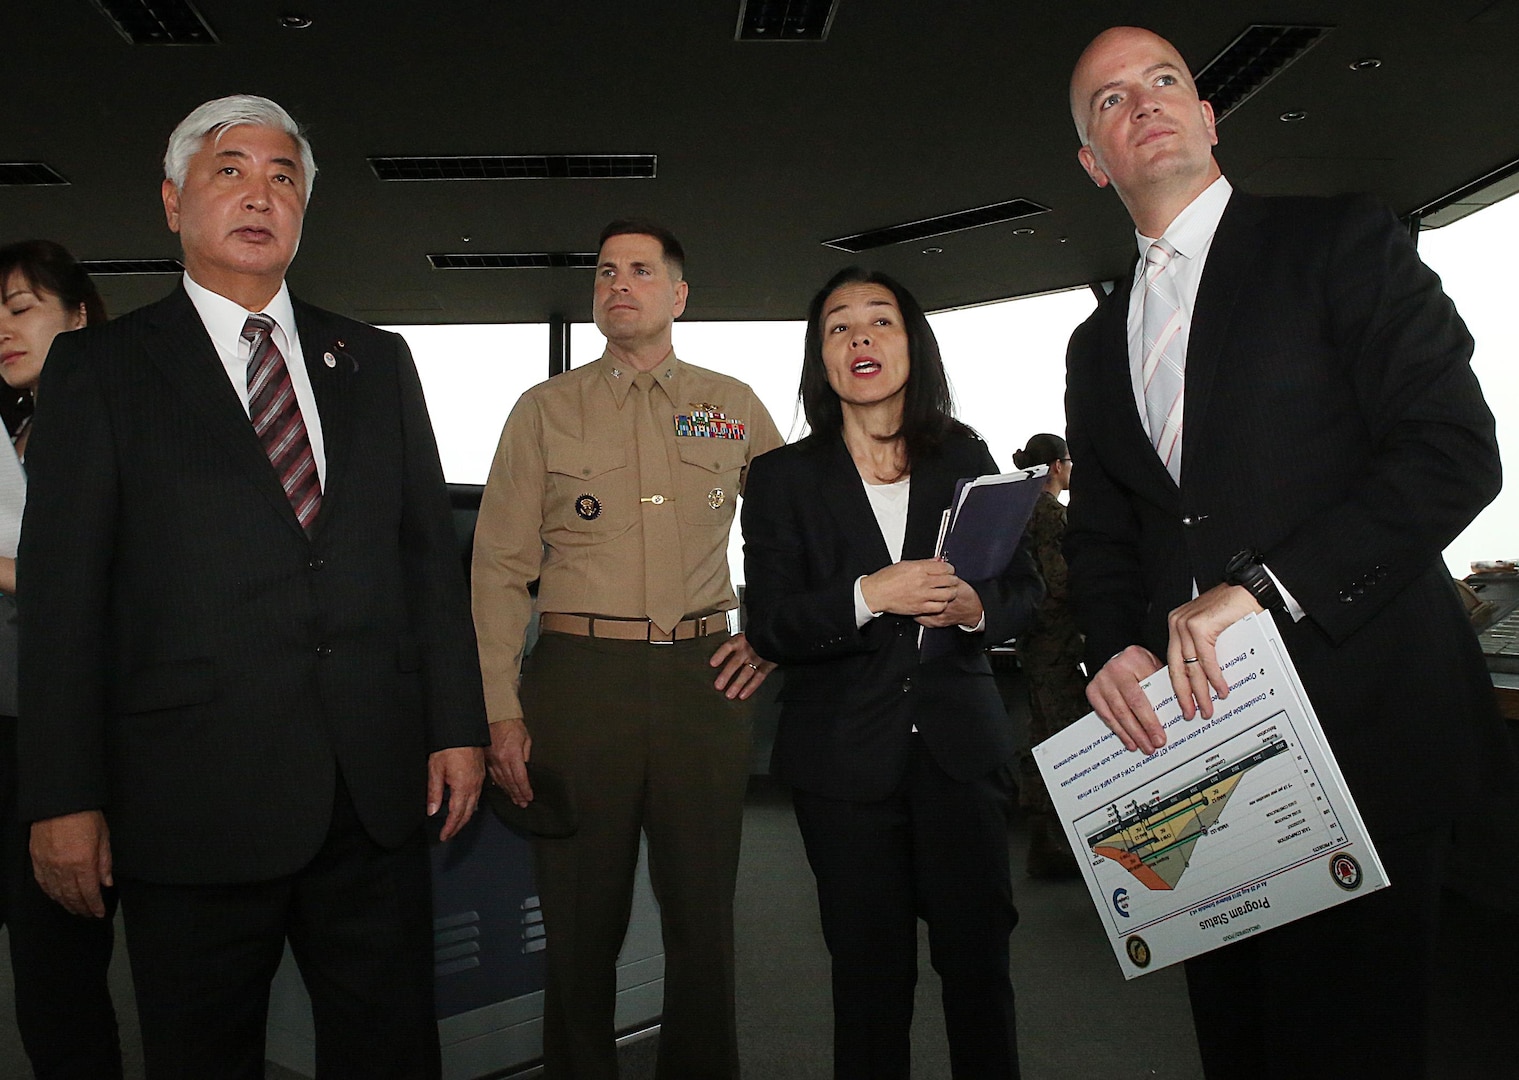 From left to right. Gen Nakatani, Japanese Defense Minister, tours the air traffic control tower with Col. Robert V. Boucher, commanding officer of Marine Corps Air Station Iwakuni, Japan, Yoko Seo, technical information specialist with protocol at Headquarters and Headquarters Squadron, and Brian Wottowa, director of Iwakuni's Integrated Program Management Office for the Defense Policy Review Initiative, during a station visit, Dec. 2, 2015. Station officials welcomed Nakatani before touring VMGR-152 and the air traffic control tower. This visit built a stronger bilateral understanding between station personnel and Japanese officials.
